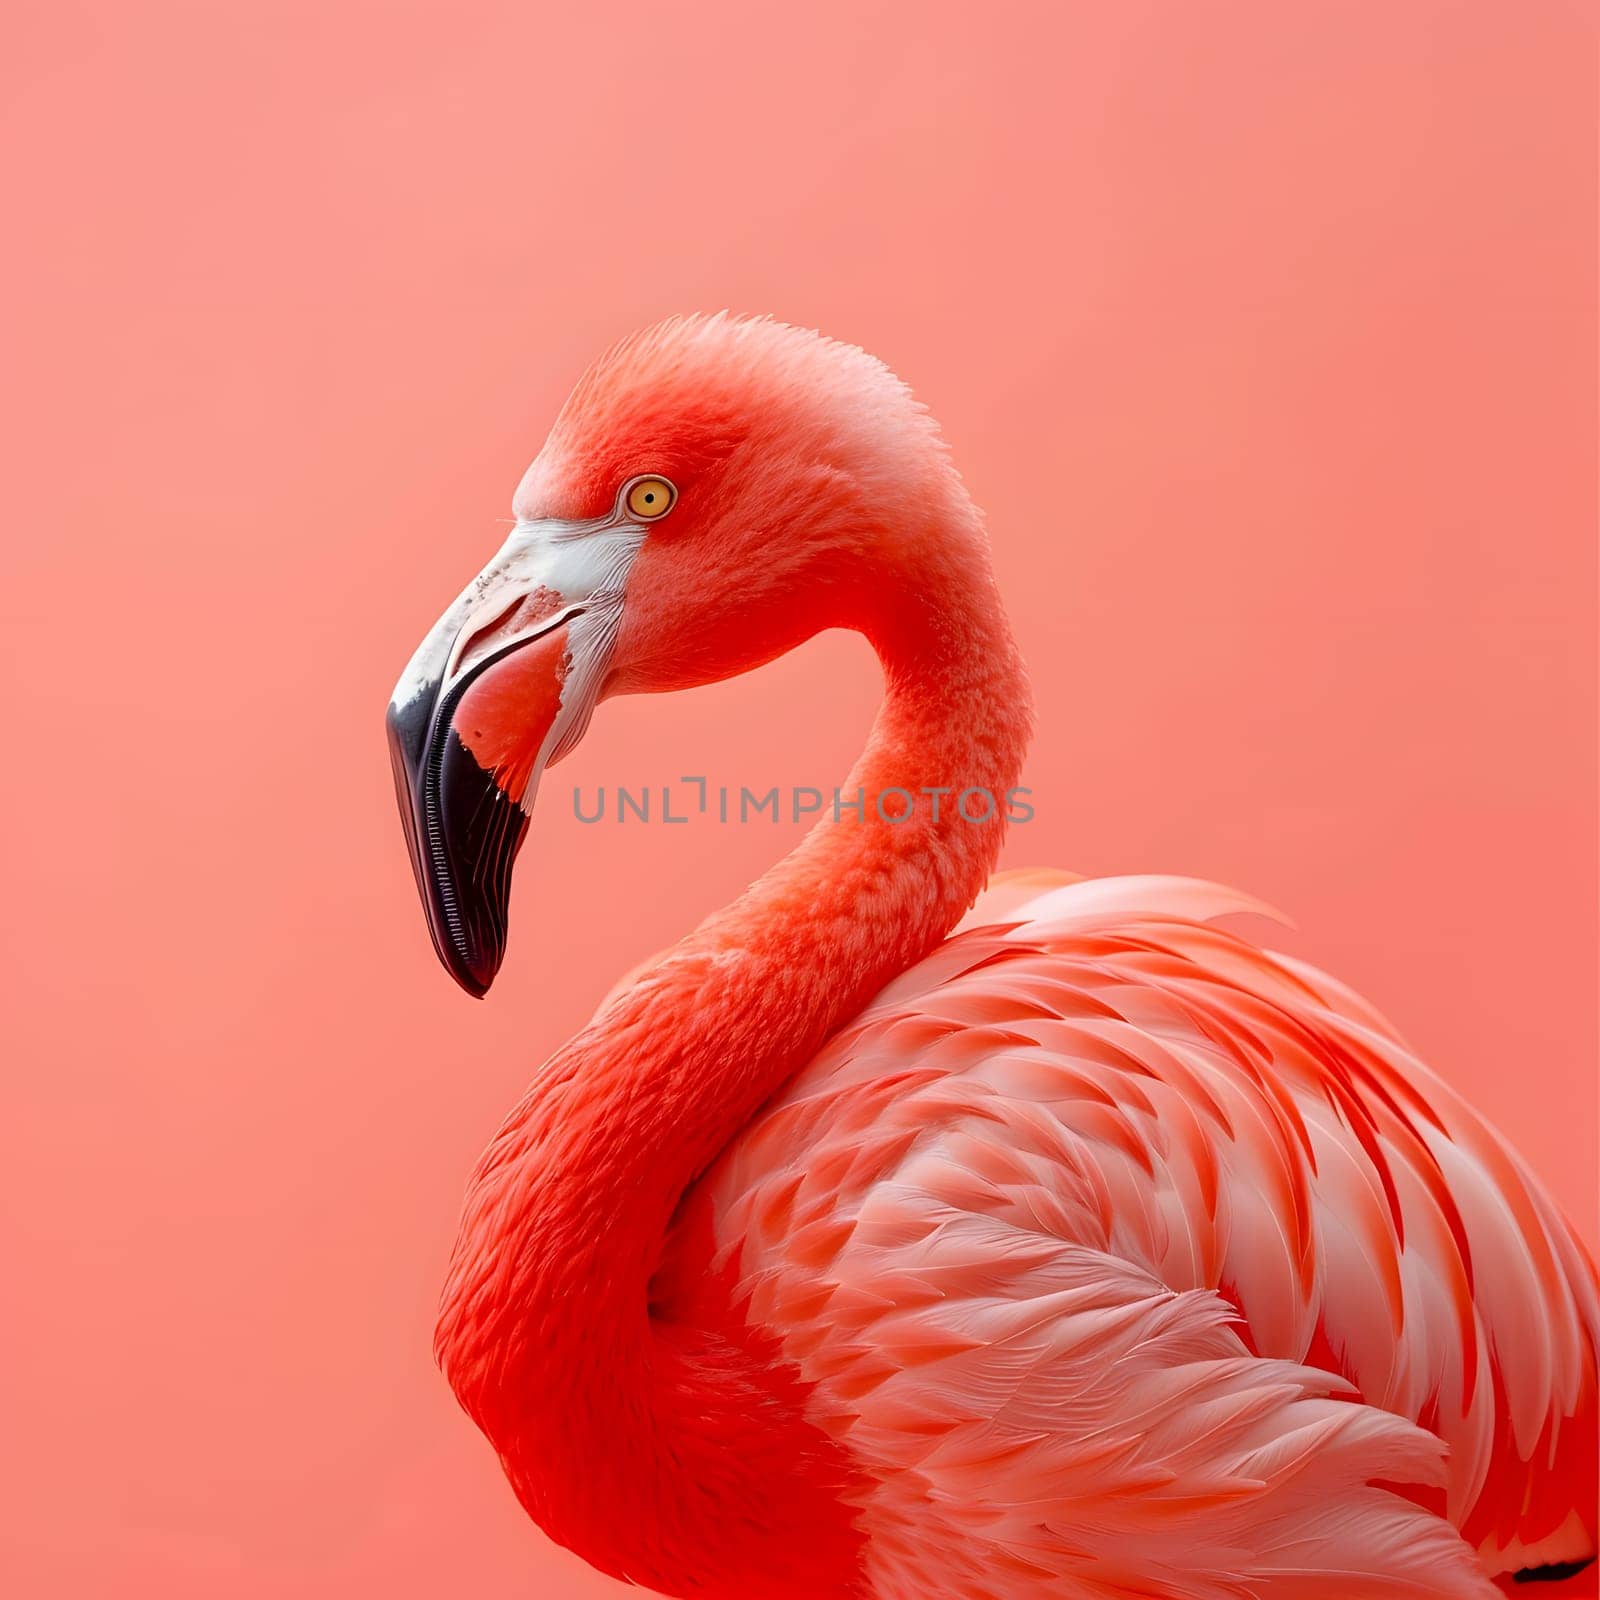 A close up of a Greater flamingo bird with a long neck and beak, showcasing its vibrant pink feathers and striking eye against a pink background